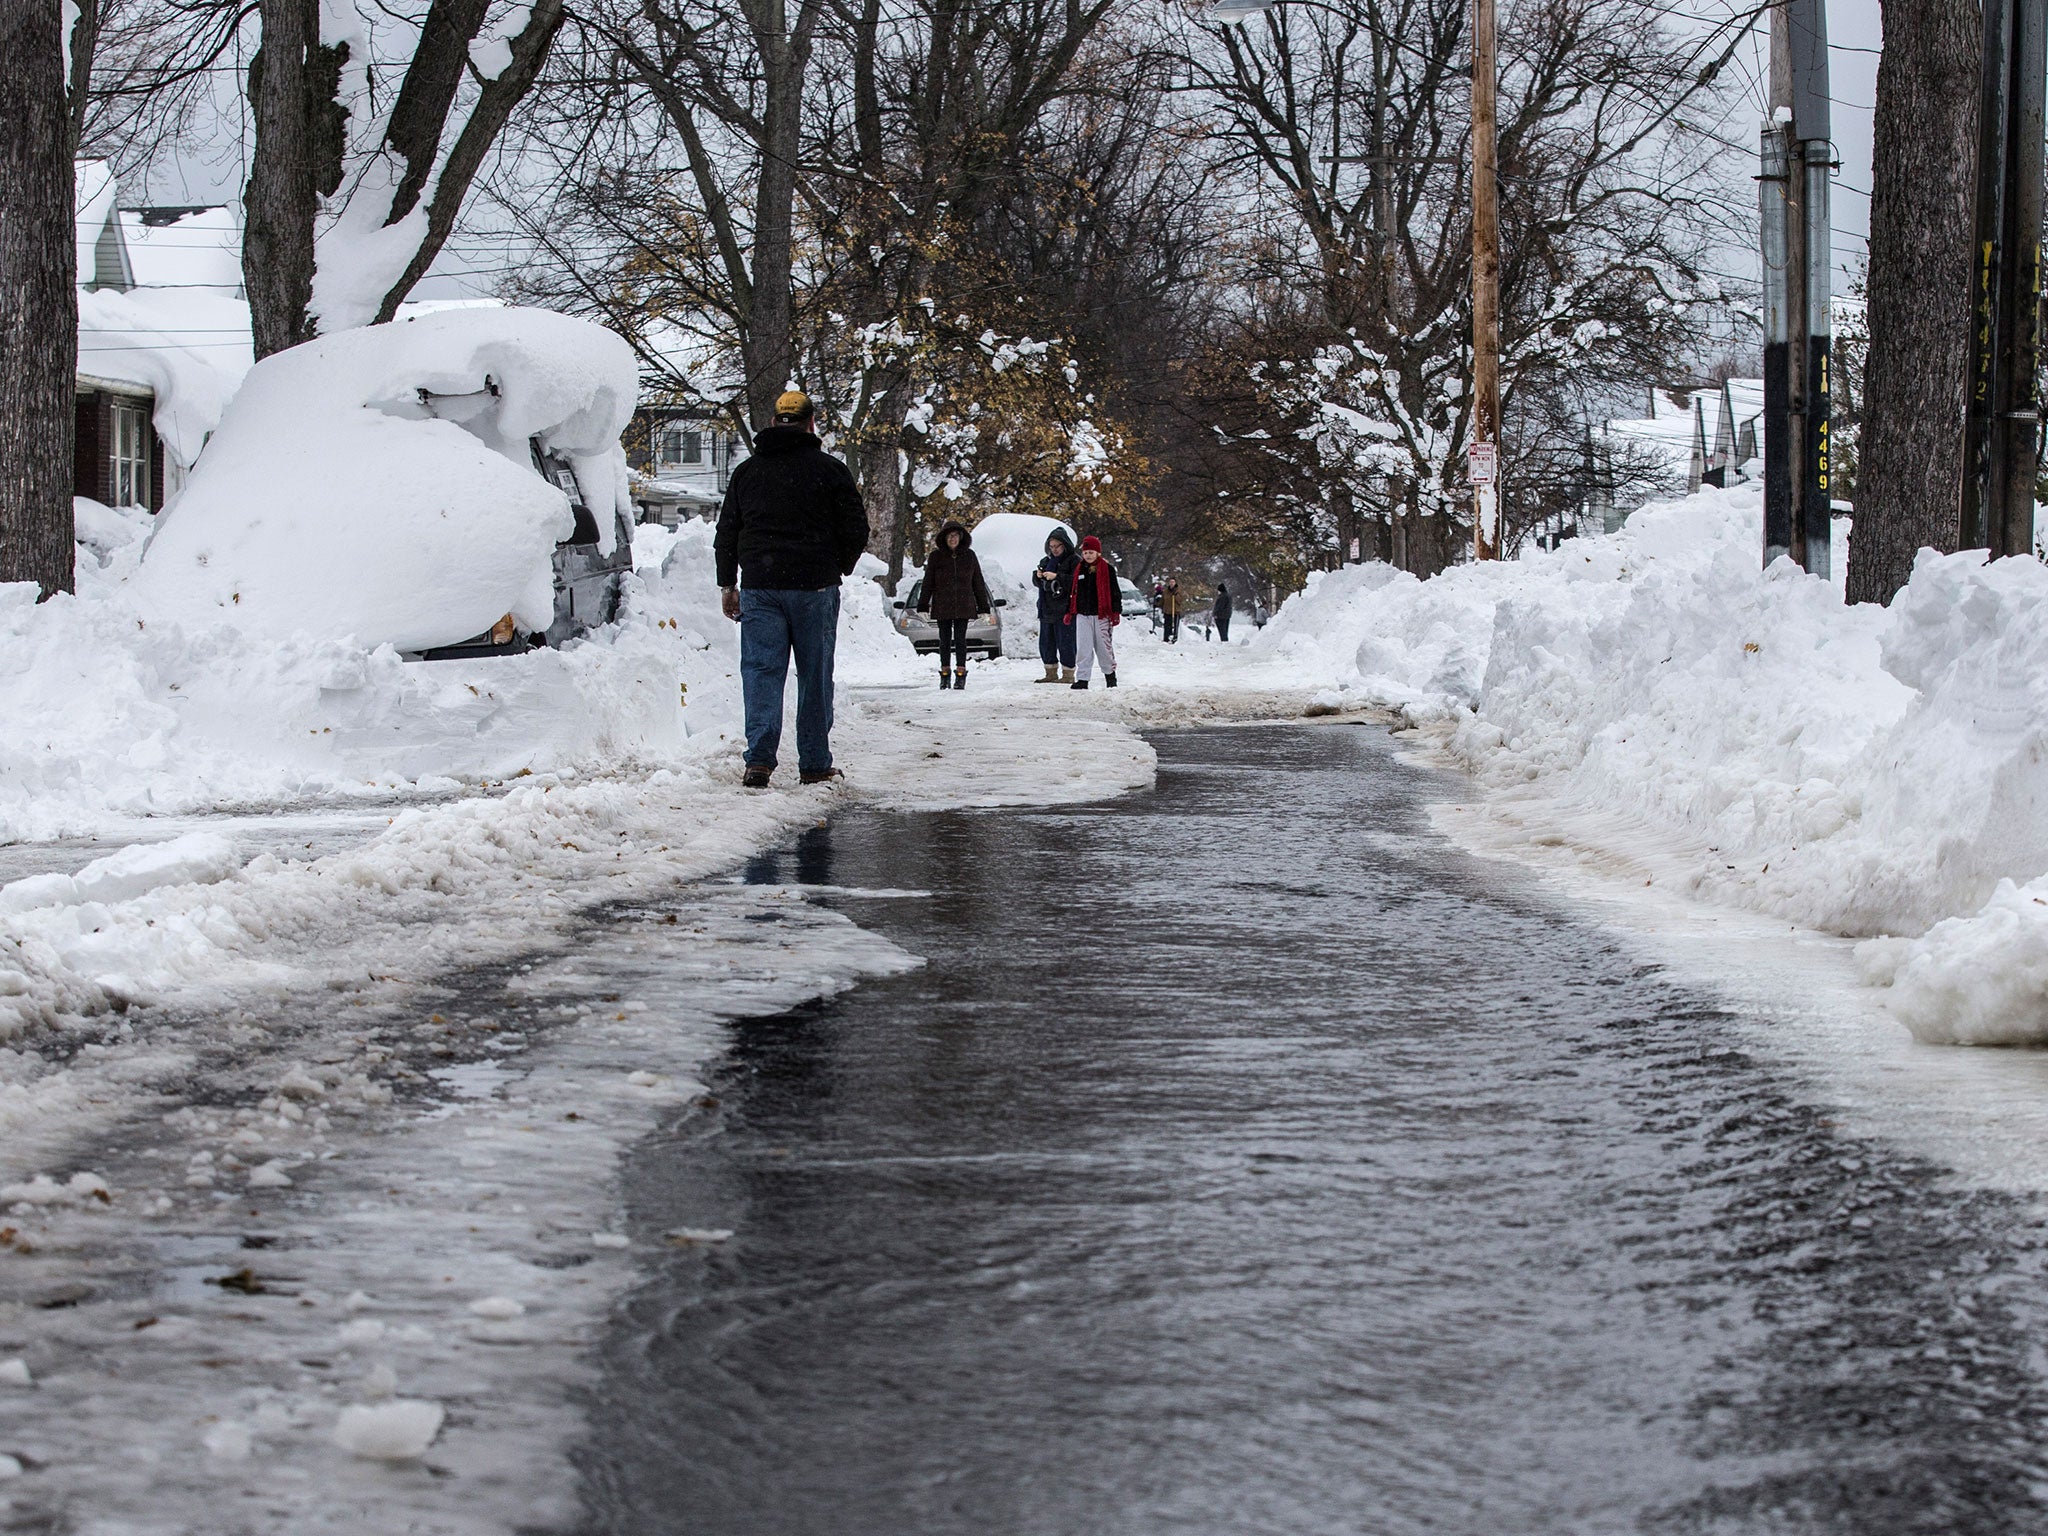 People walk down a street already flowing with water after a water main broke in Buffalo this weekend